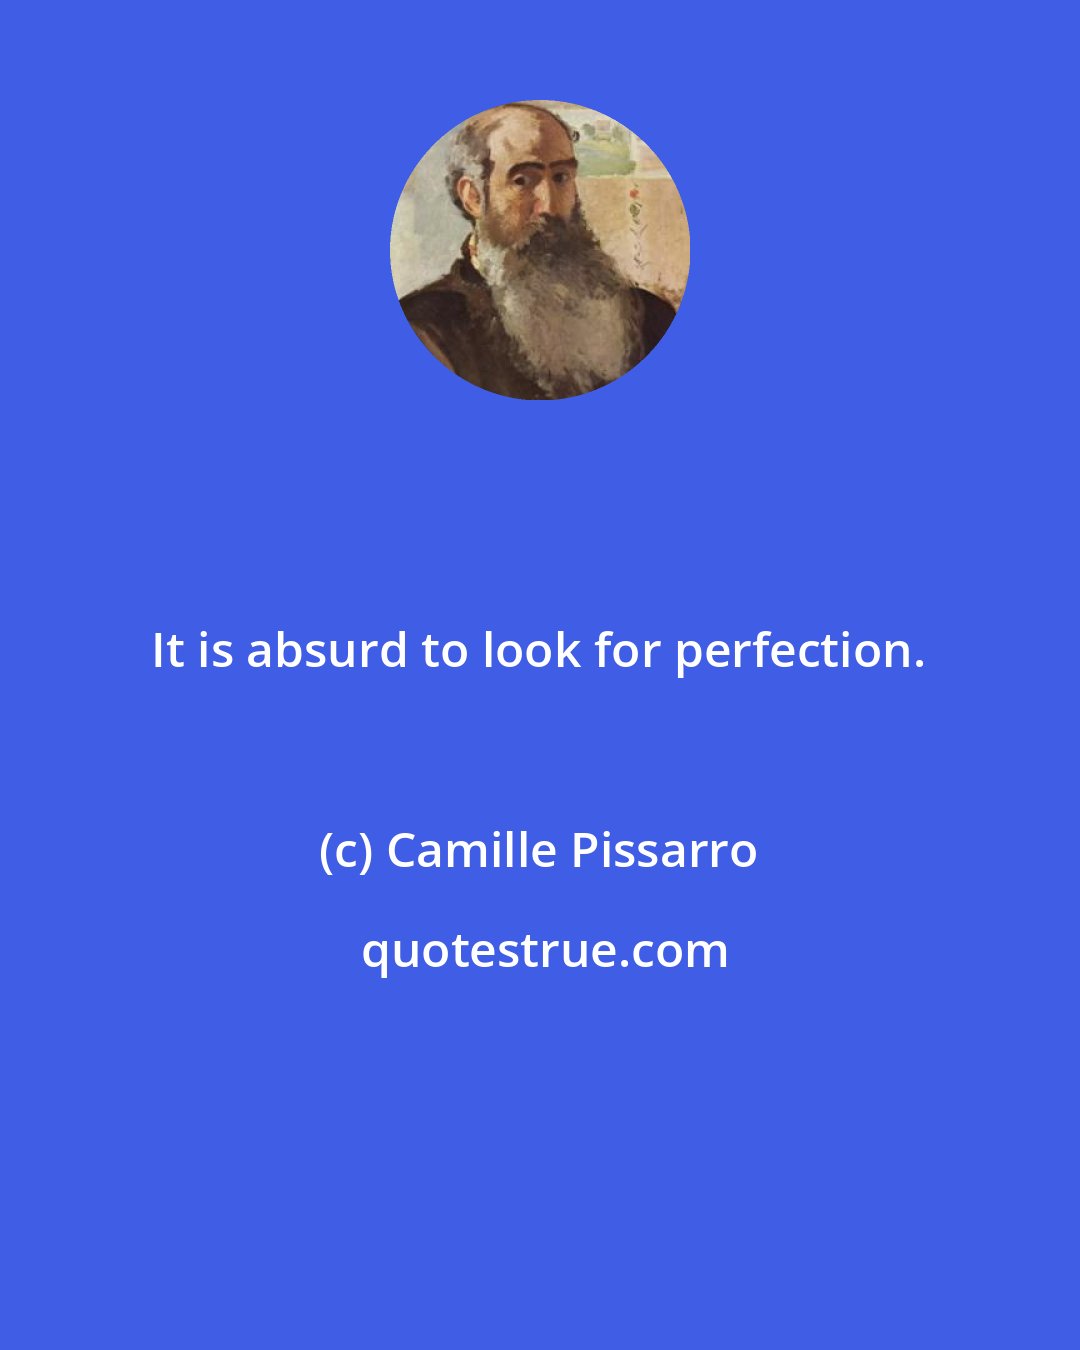 Camille Pissarro: It is absurd to look for perfection.